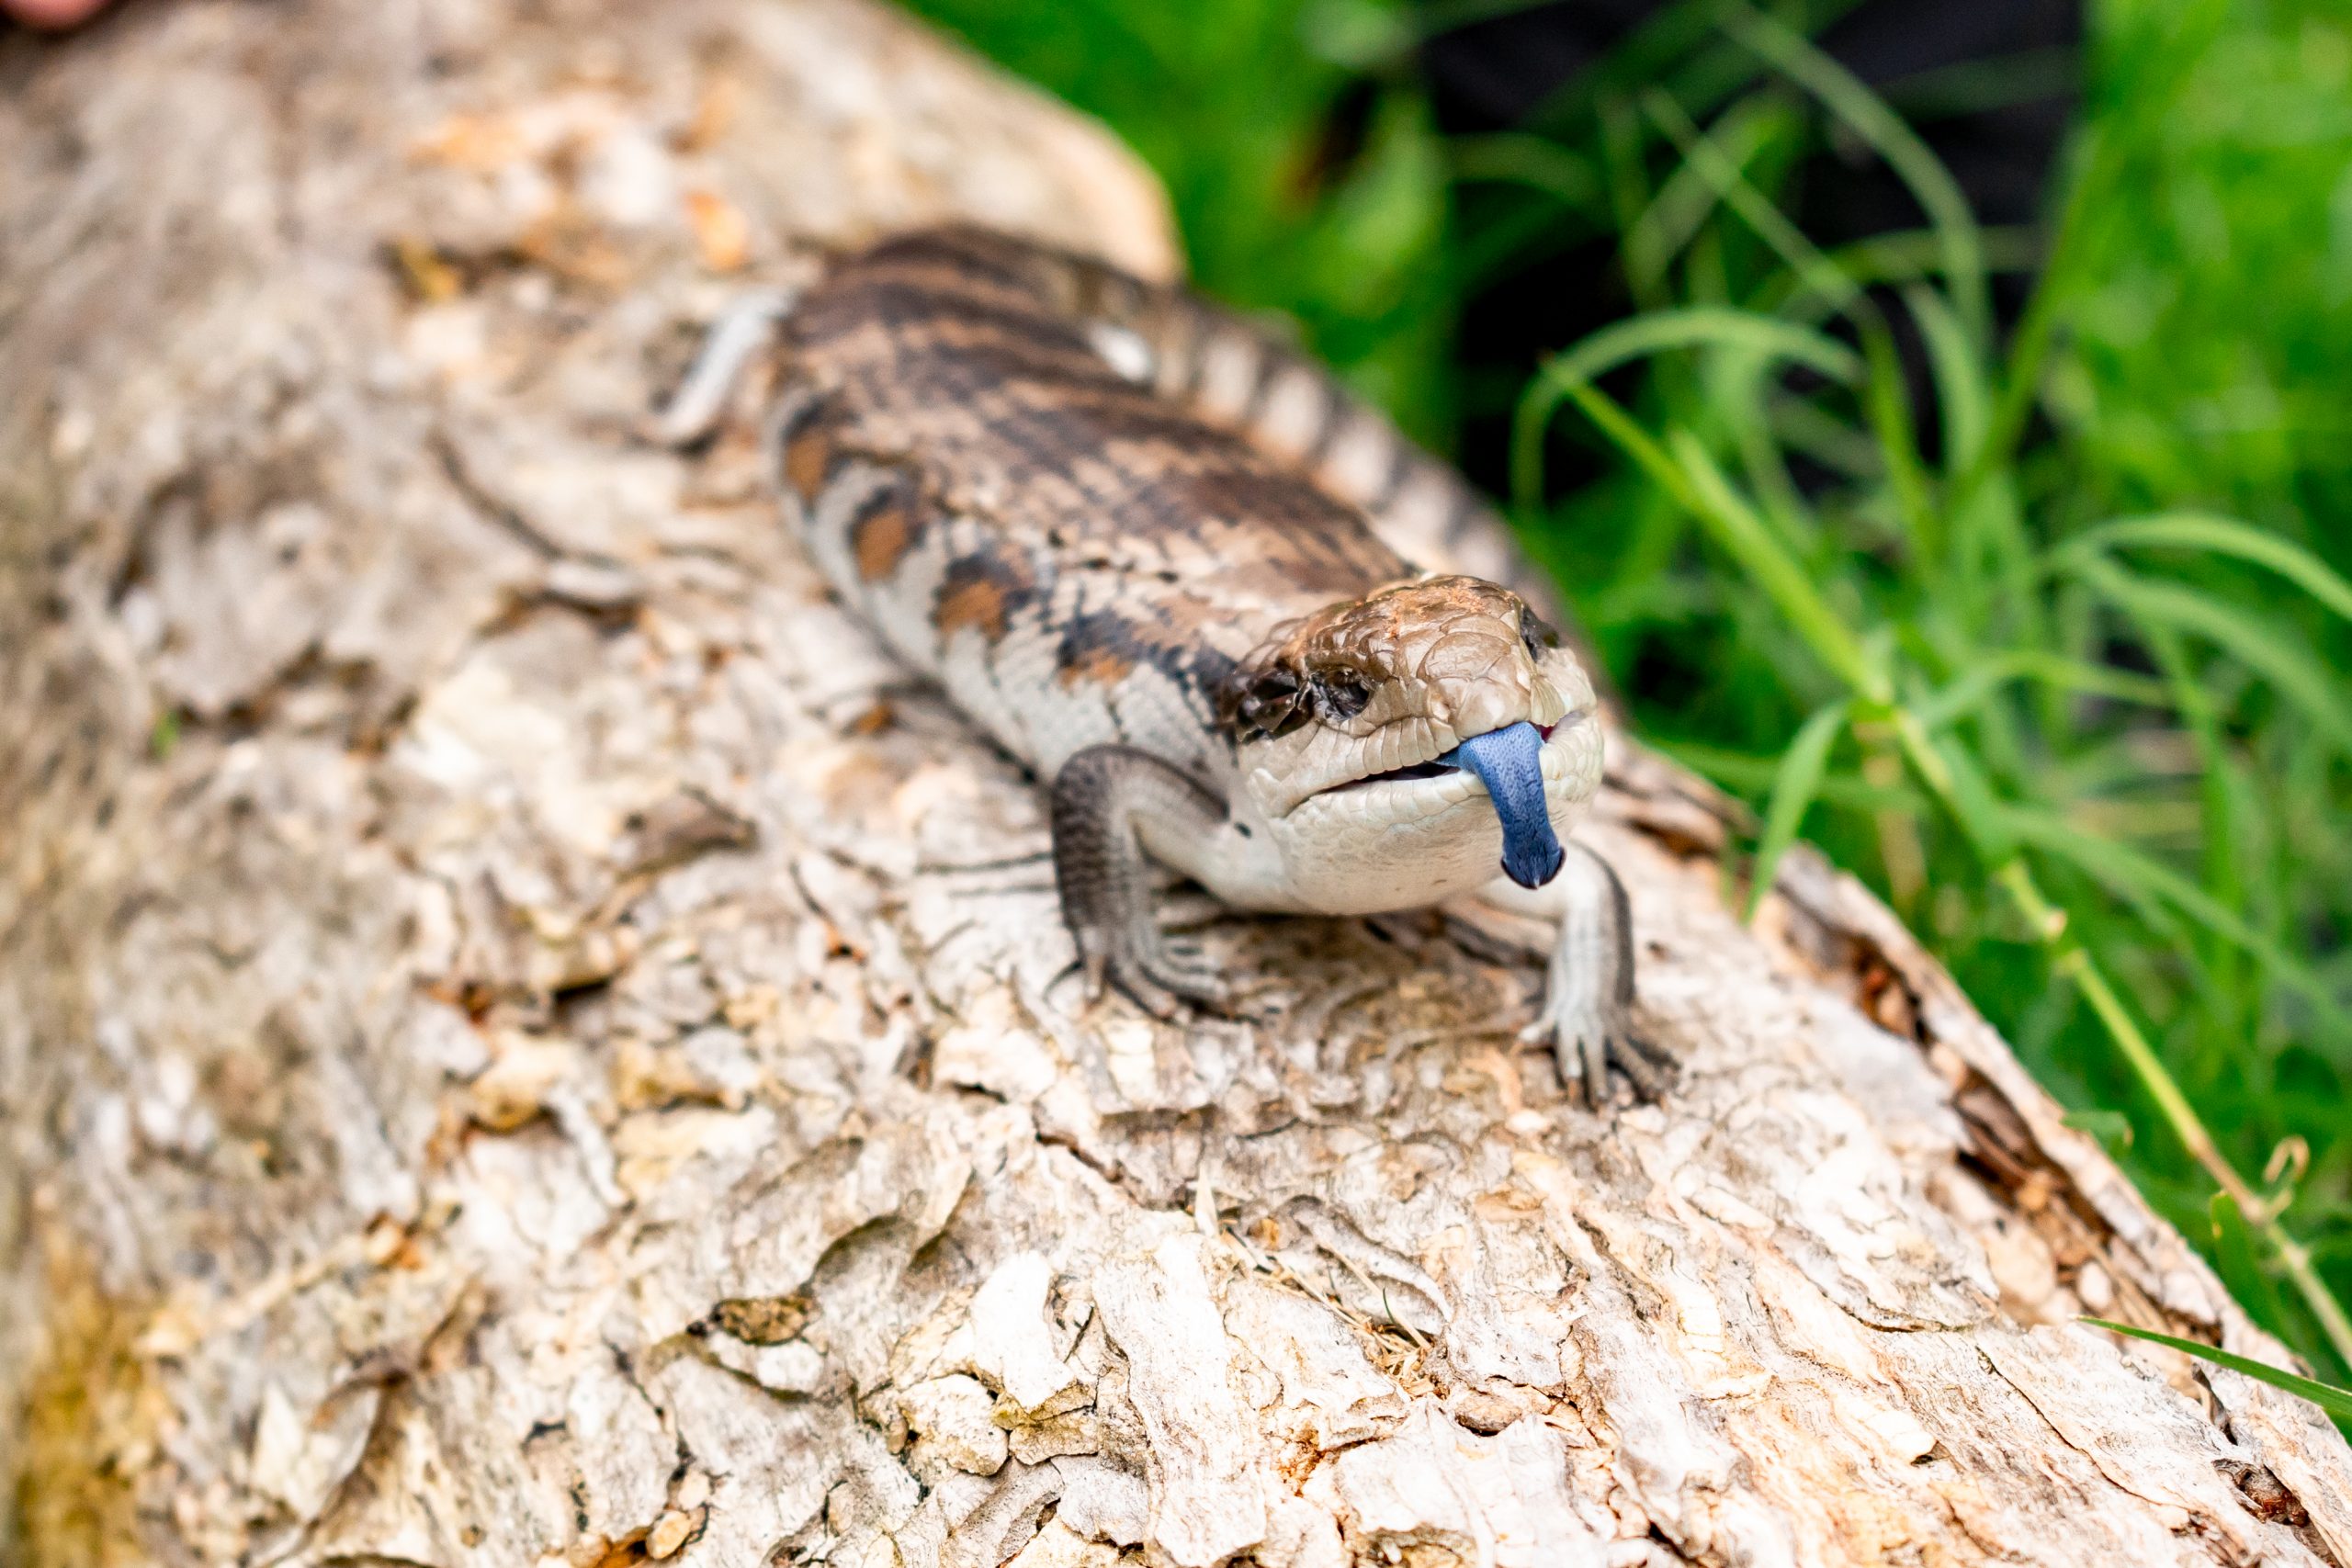 Blue tongue lizard on a log with tongue out